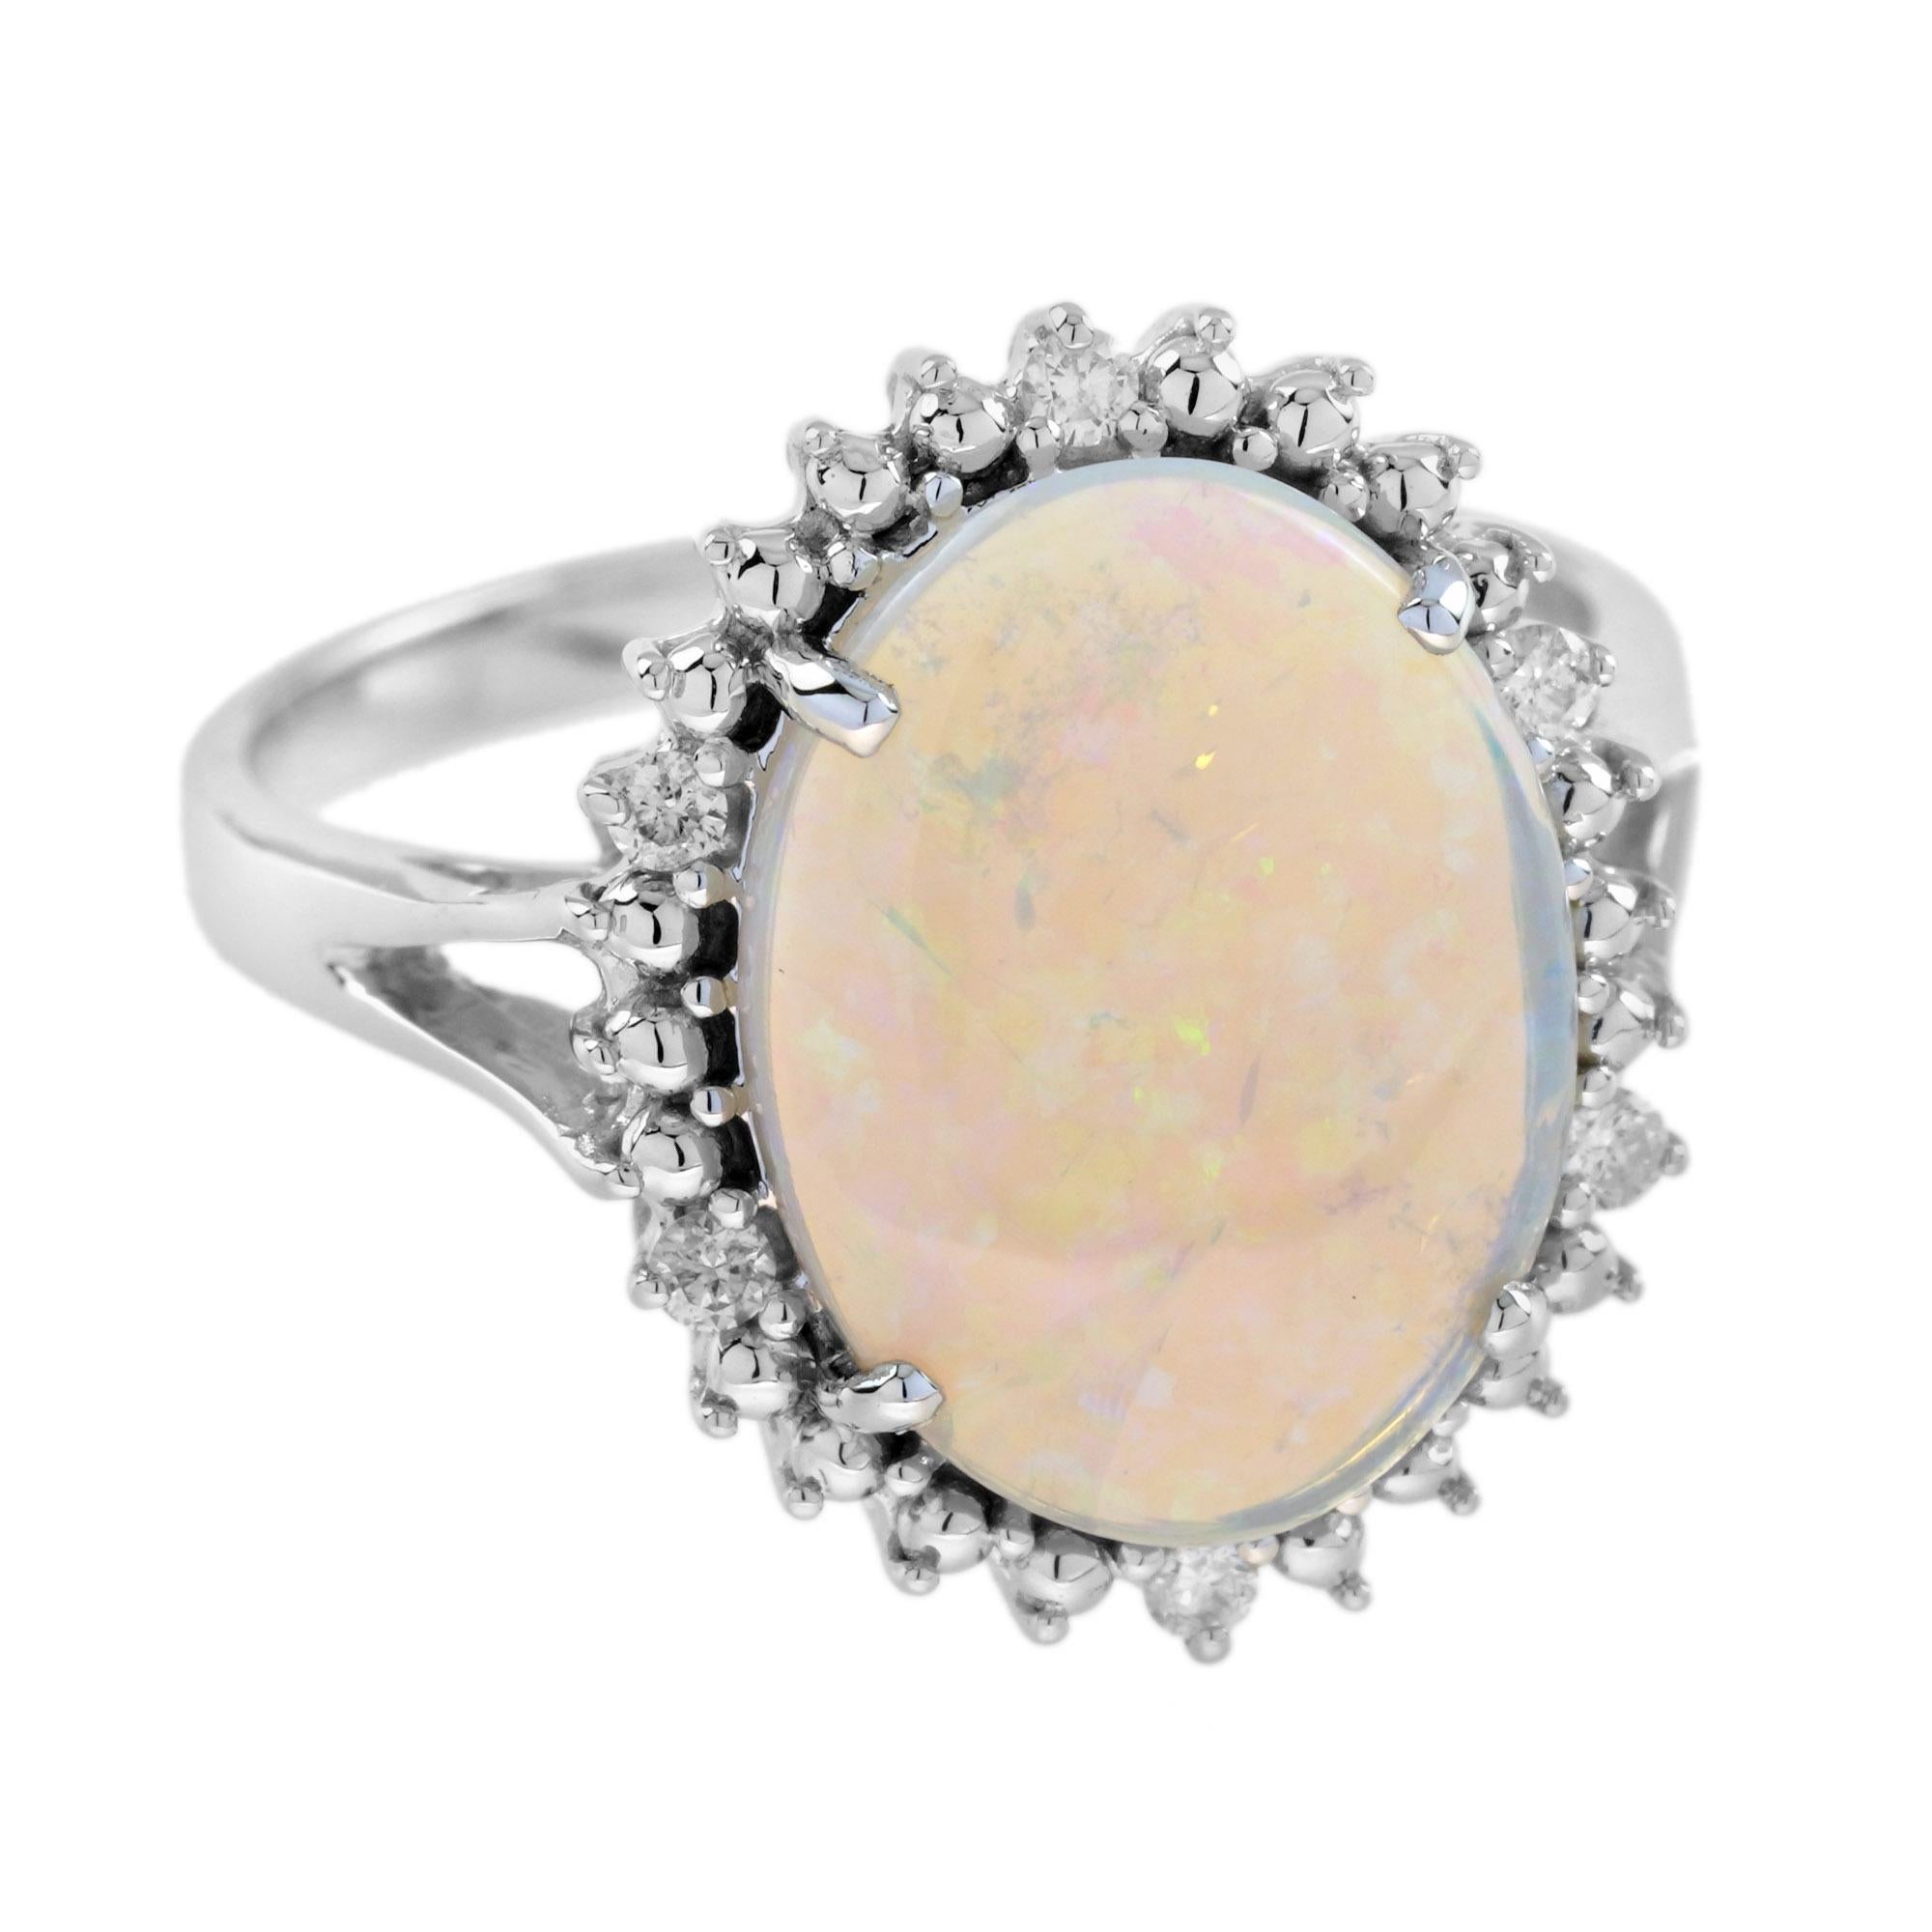 Oval Cut 2.53 Ct. Opal and Diamond Vintage Style Cocktail Ring in 9K White Gold